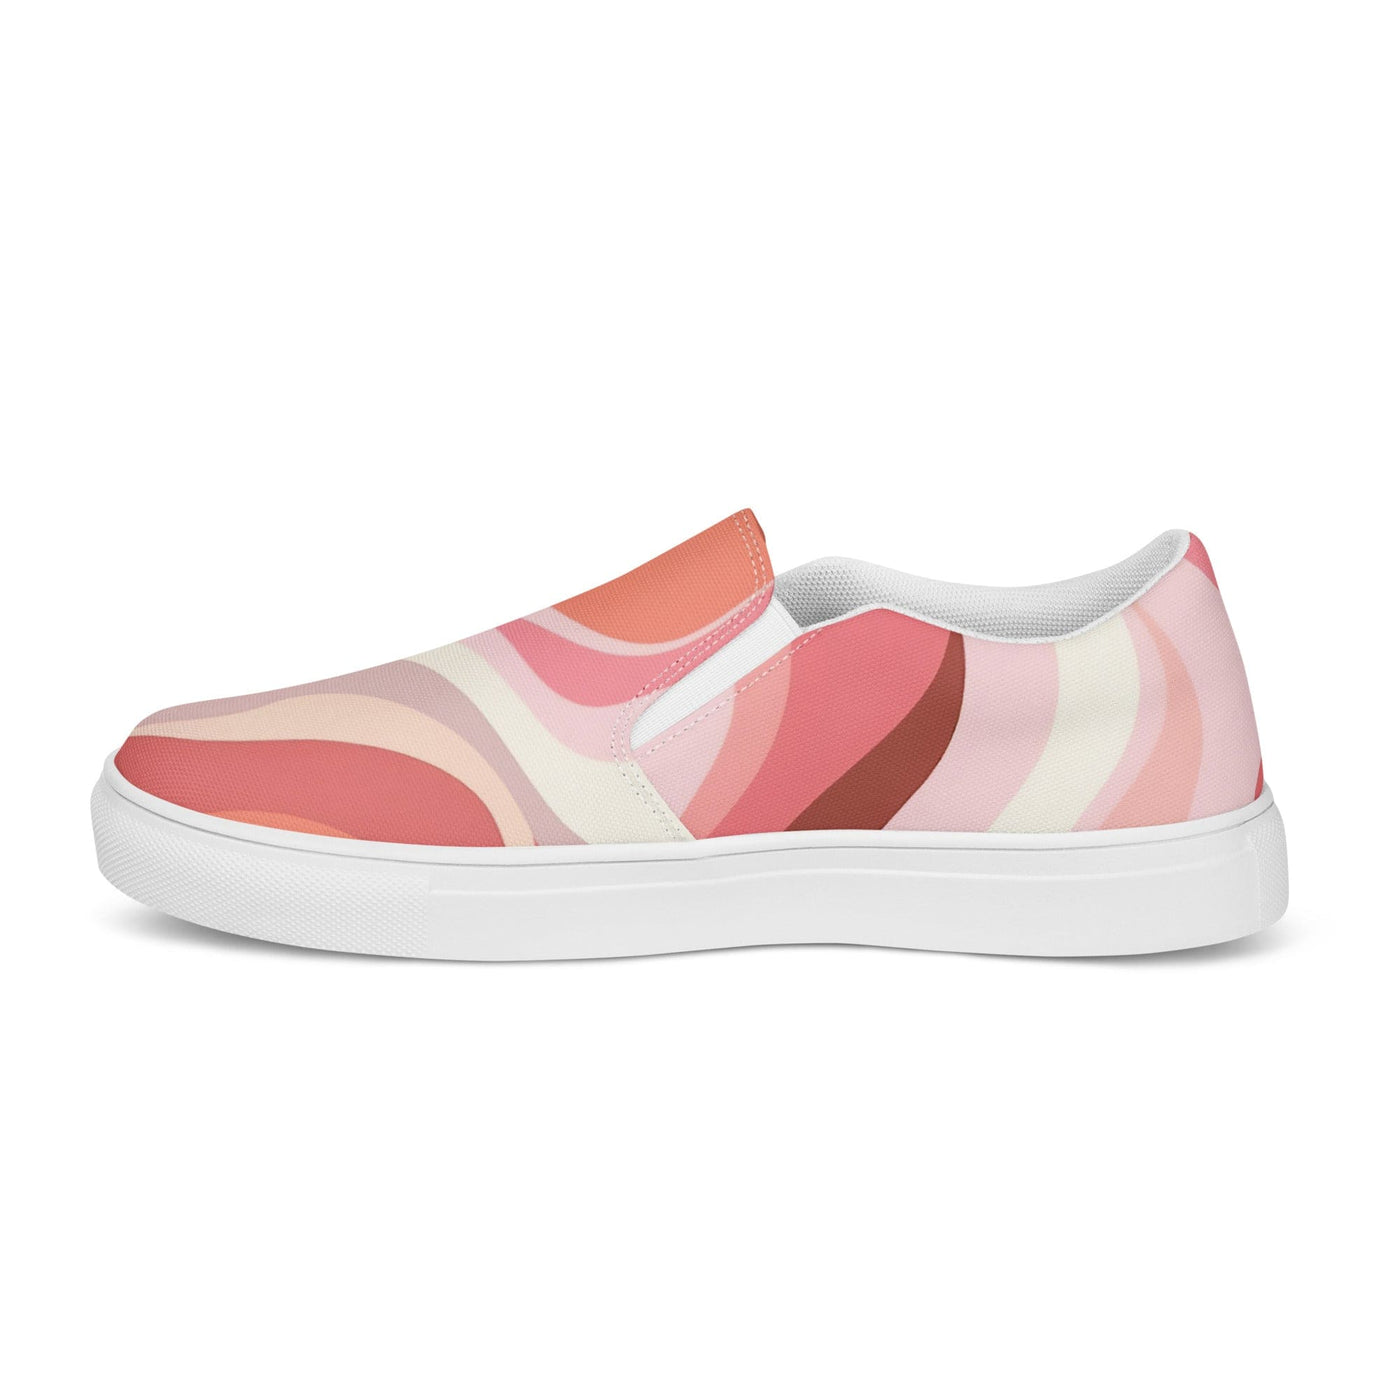 Women’s Slip-on Canvas Shoes Boho Pink And White Contemporary Art - Womens